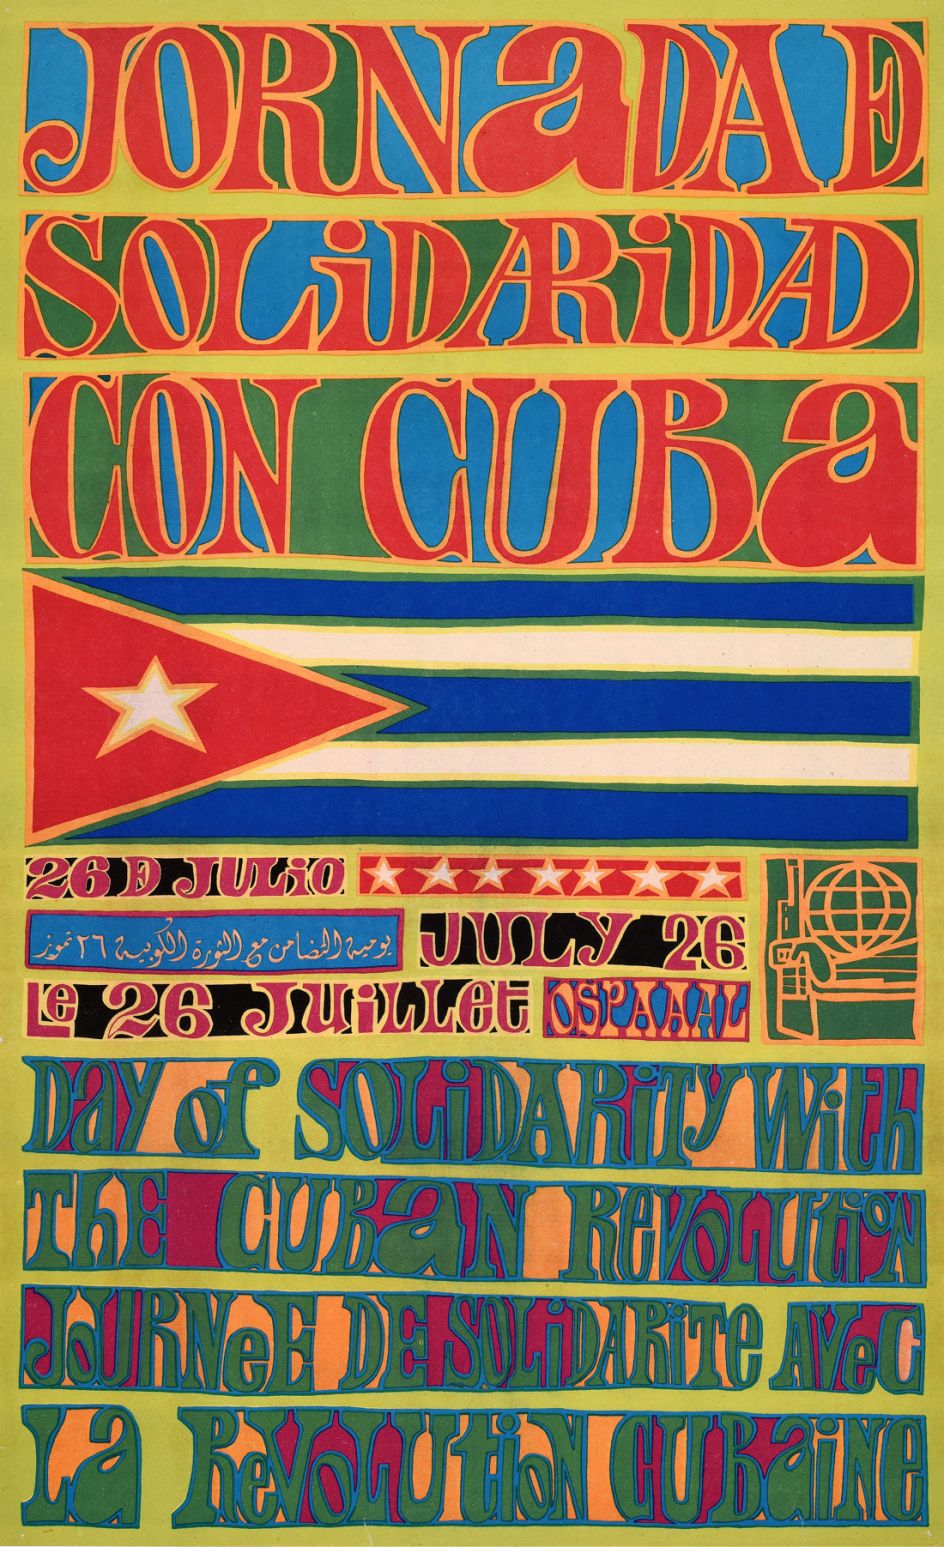 Olivio Martínez Viera, 1969, OSPAAAL, The Mike Stanfield Collection